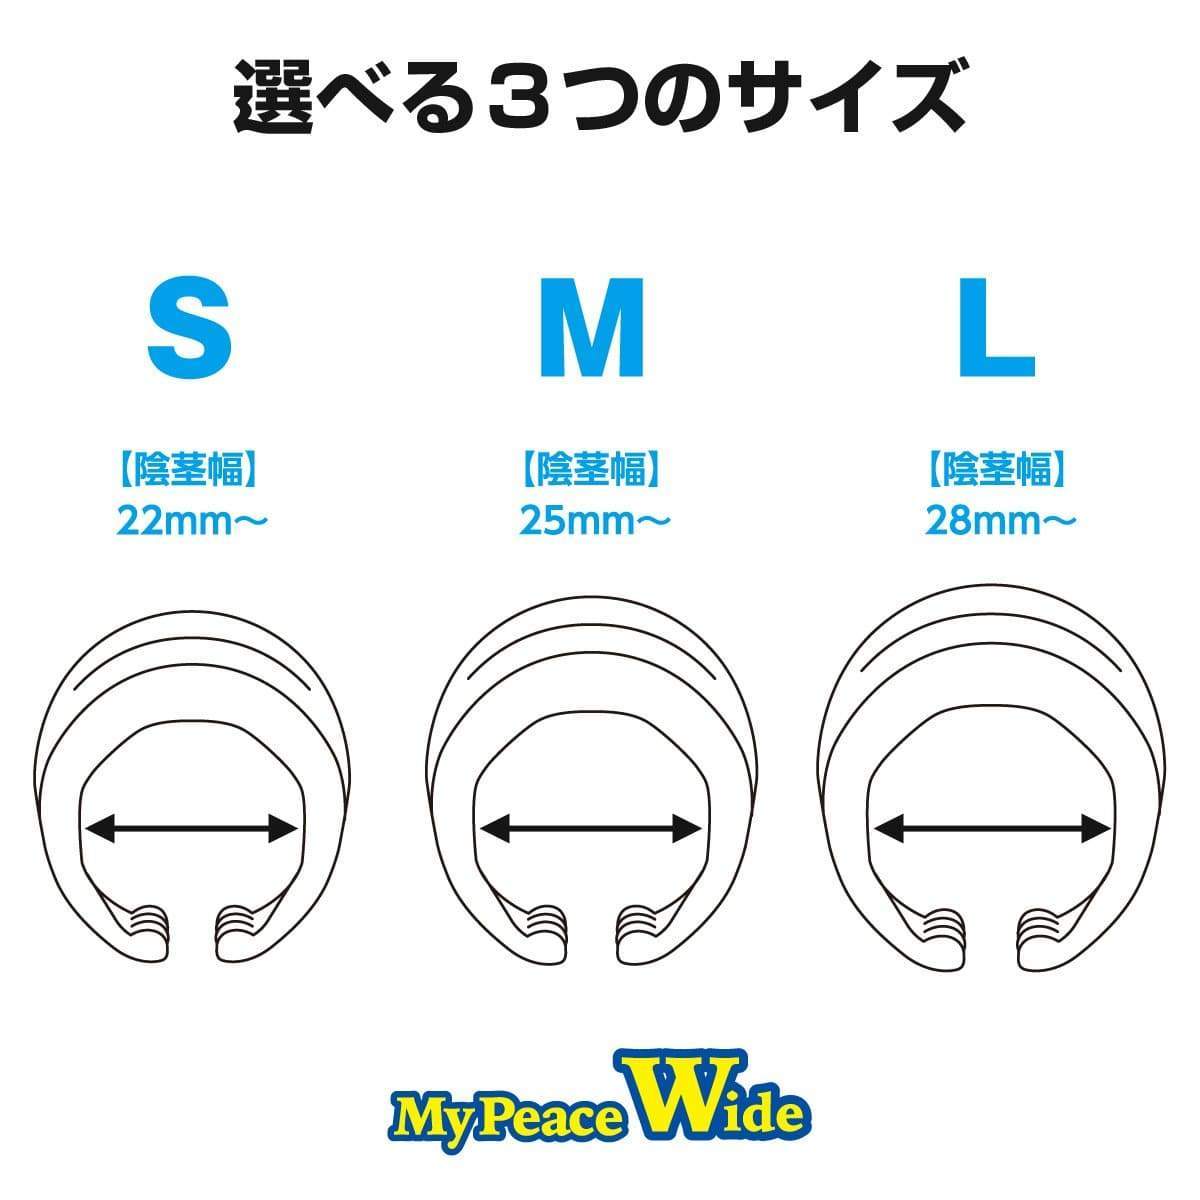 SSI Japan - My Peace Wide Soft Night Size L Correction Cock Ring (Clear) -  Cock Ring (Non Vibration)  Durio.sg